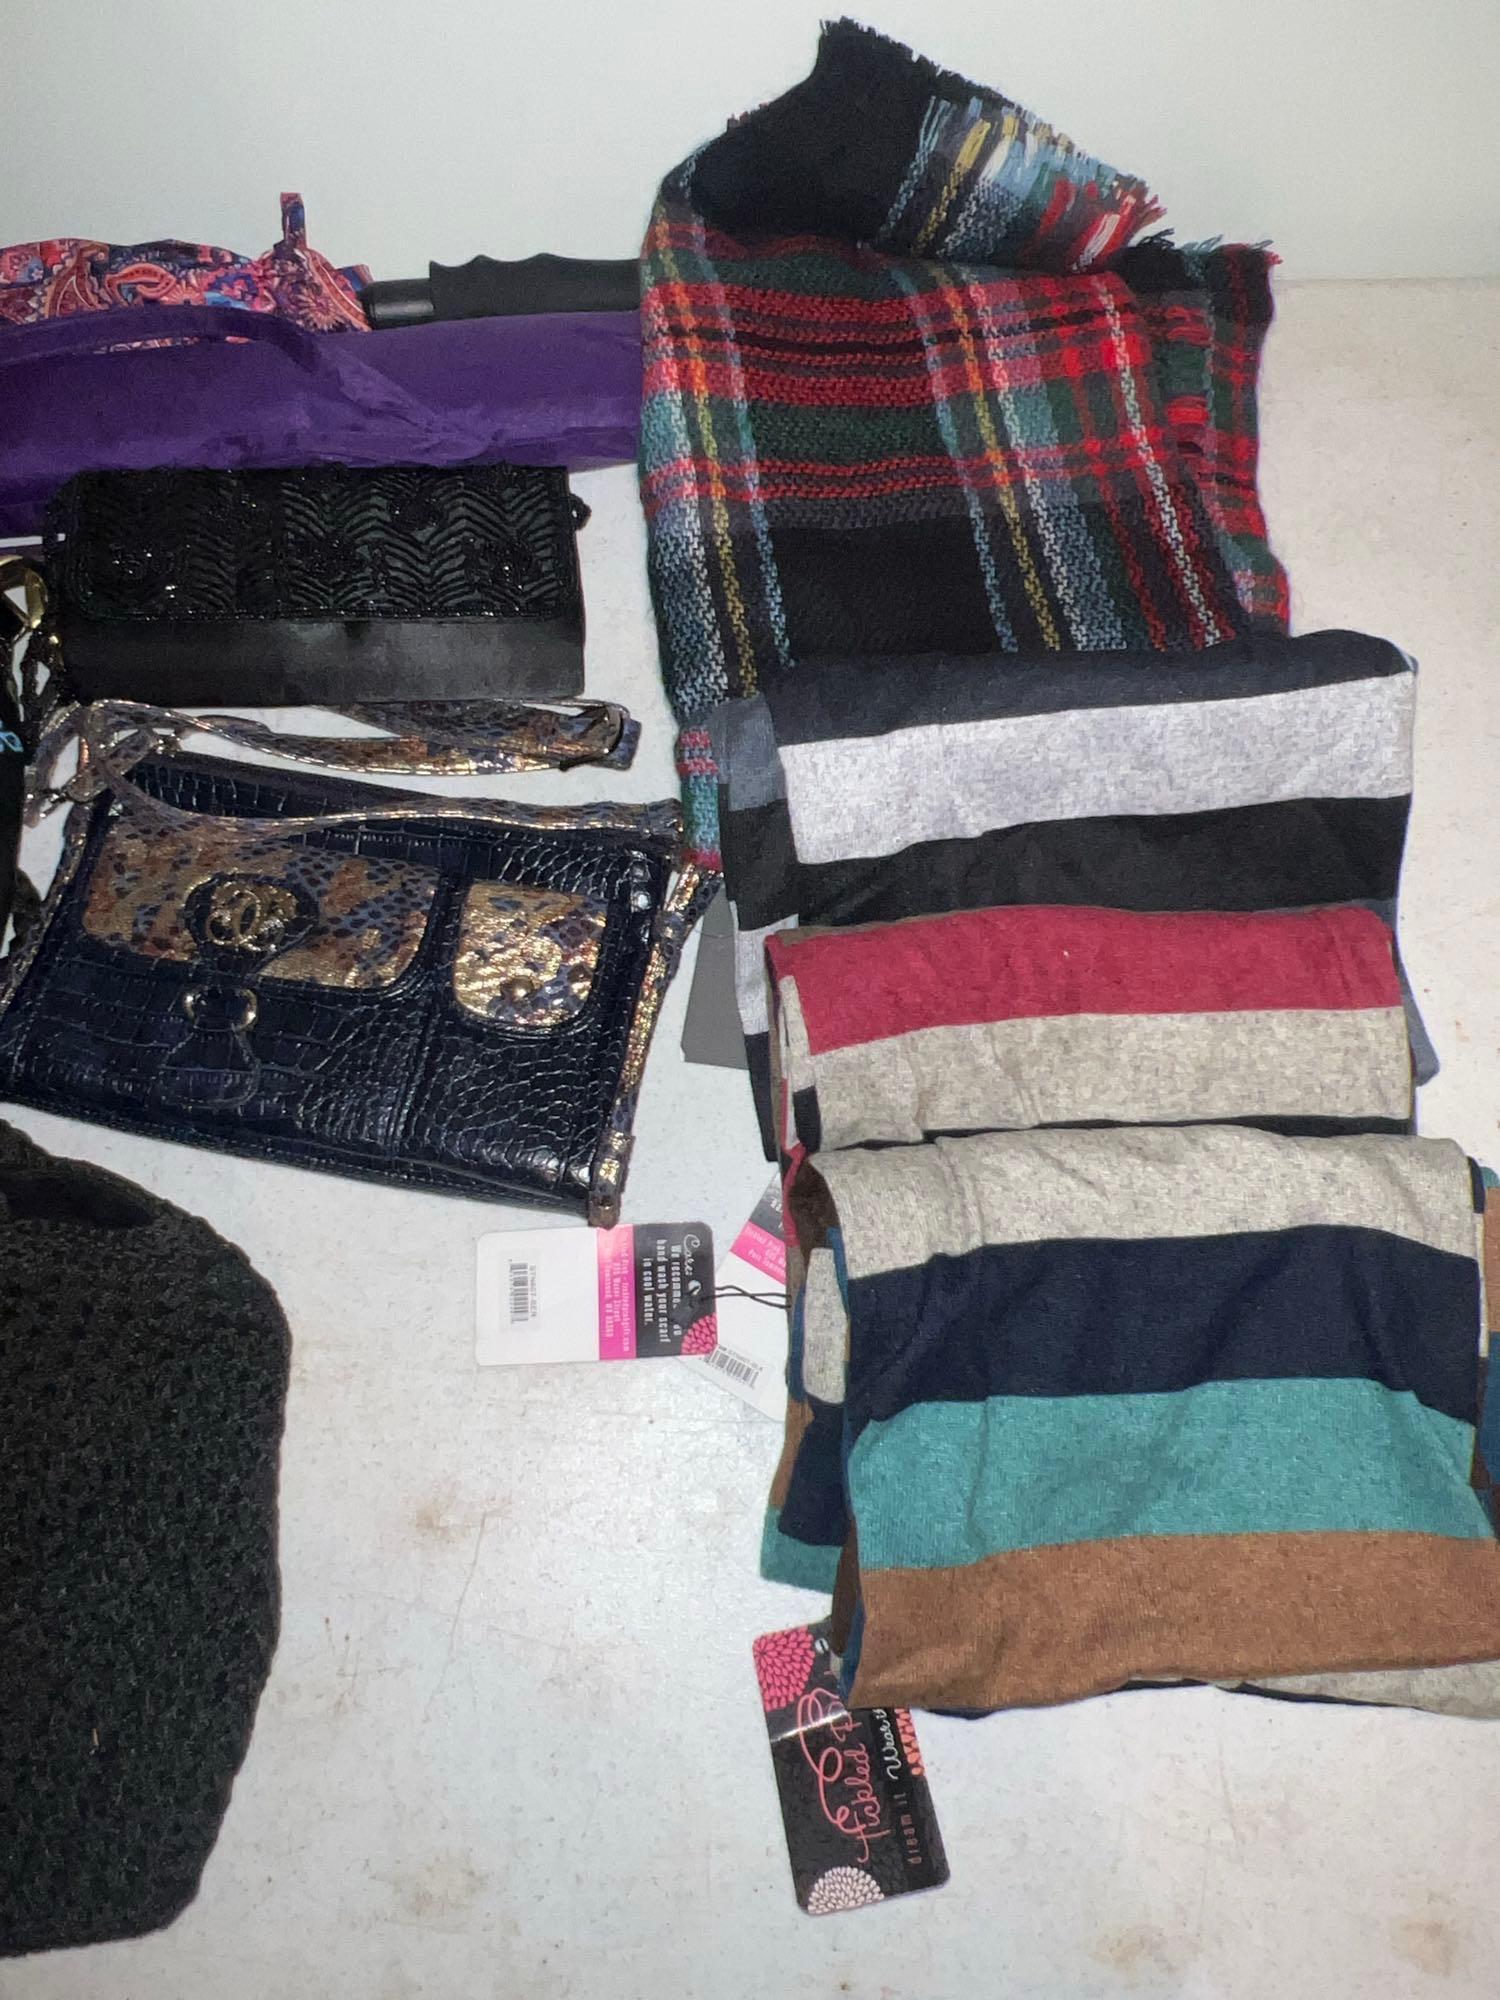 Hand Bags, Purses & Scarves